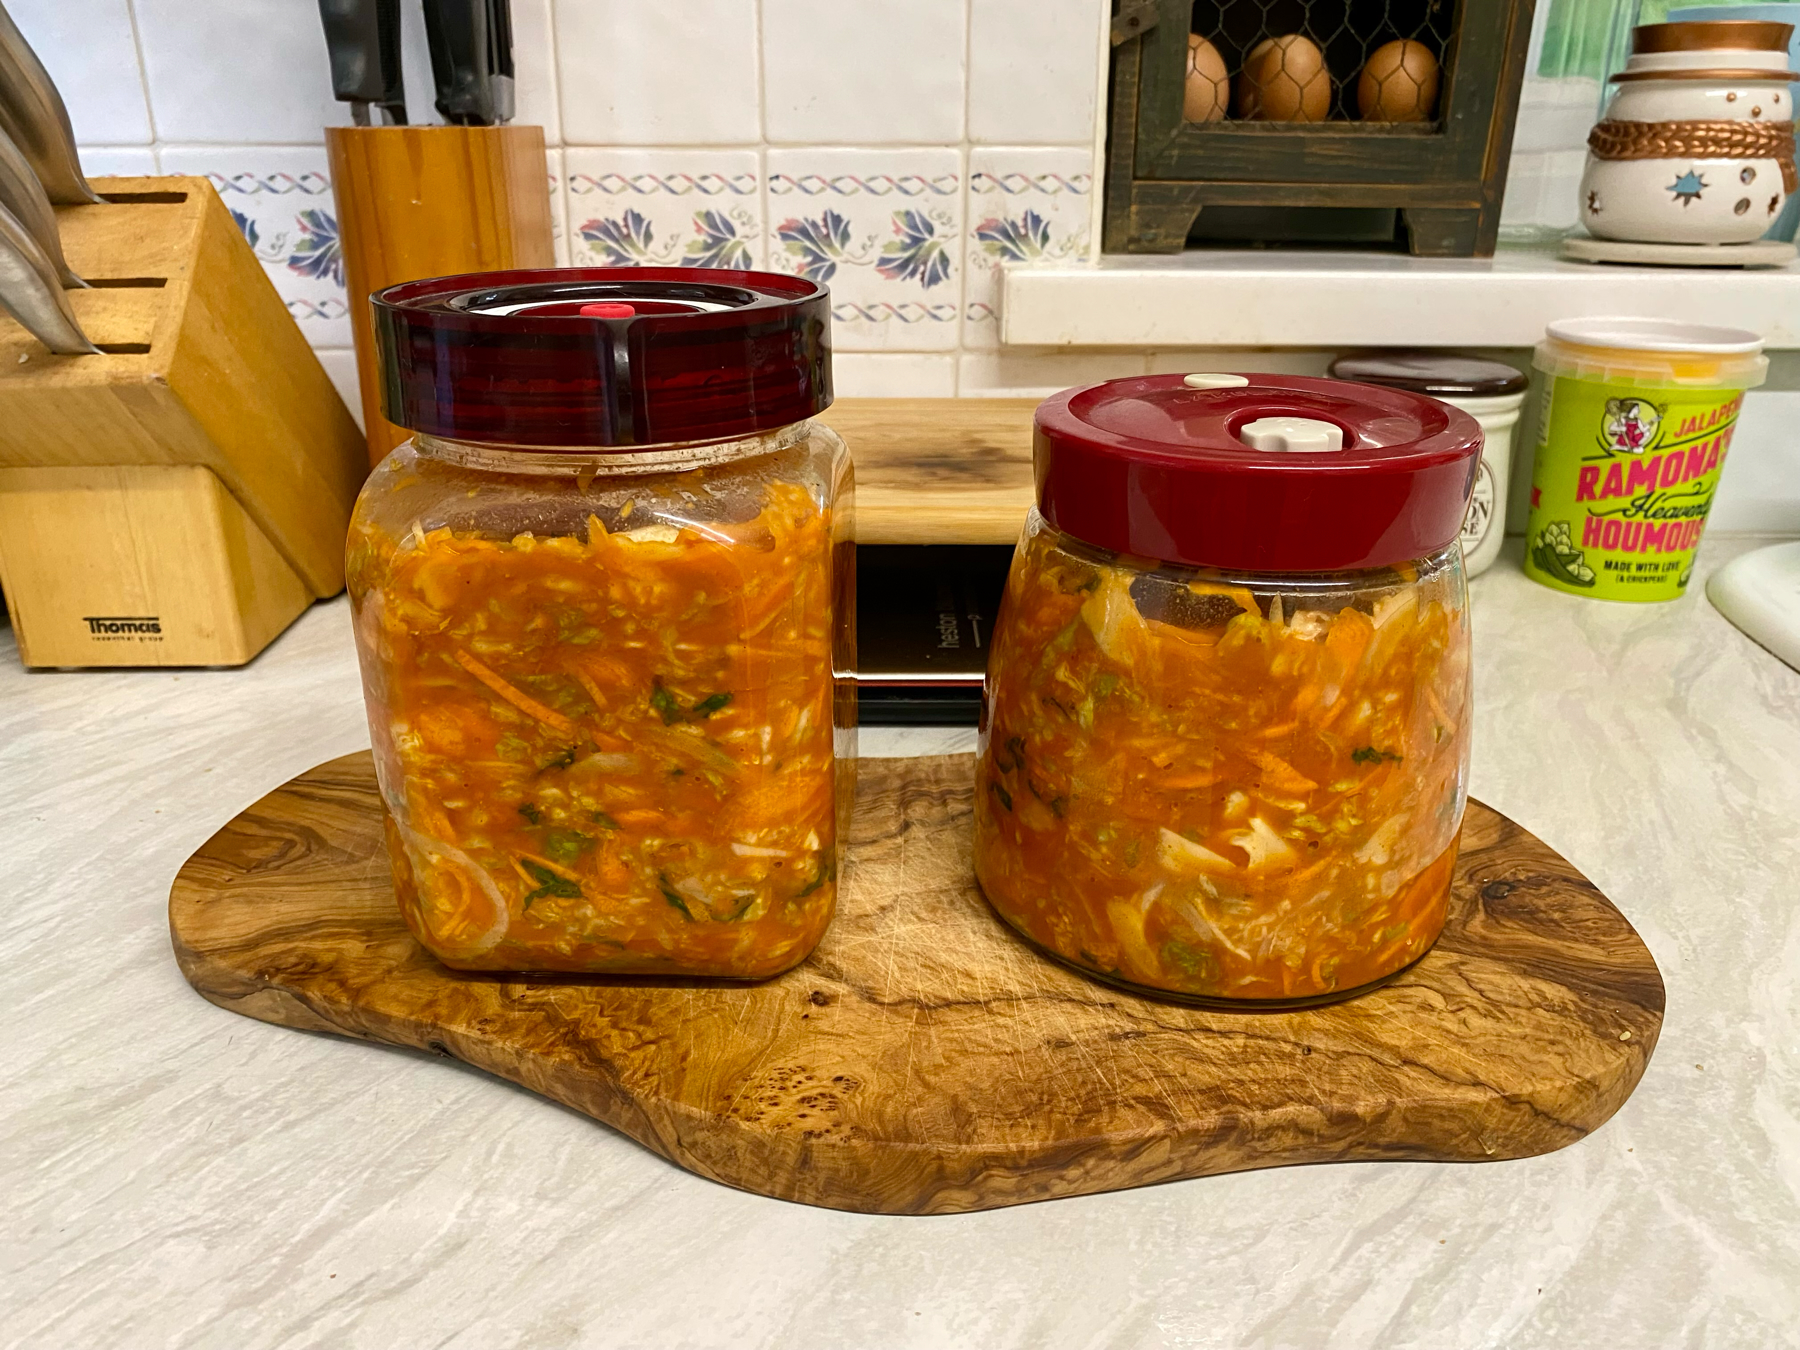 Two sealed jars of finely chopped vegetables in a reddish brown liquid